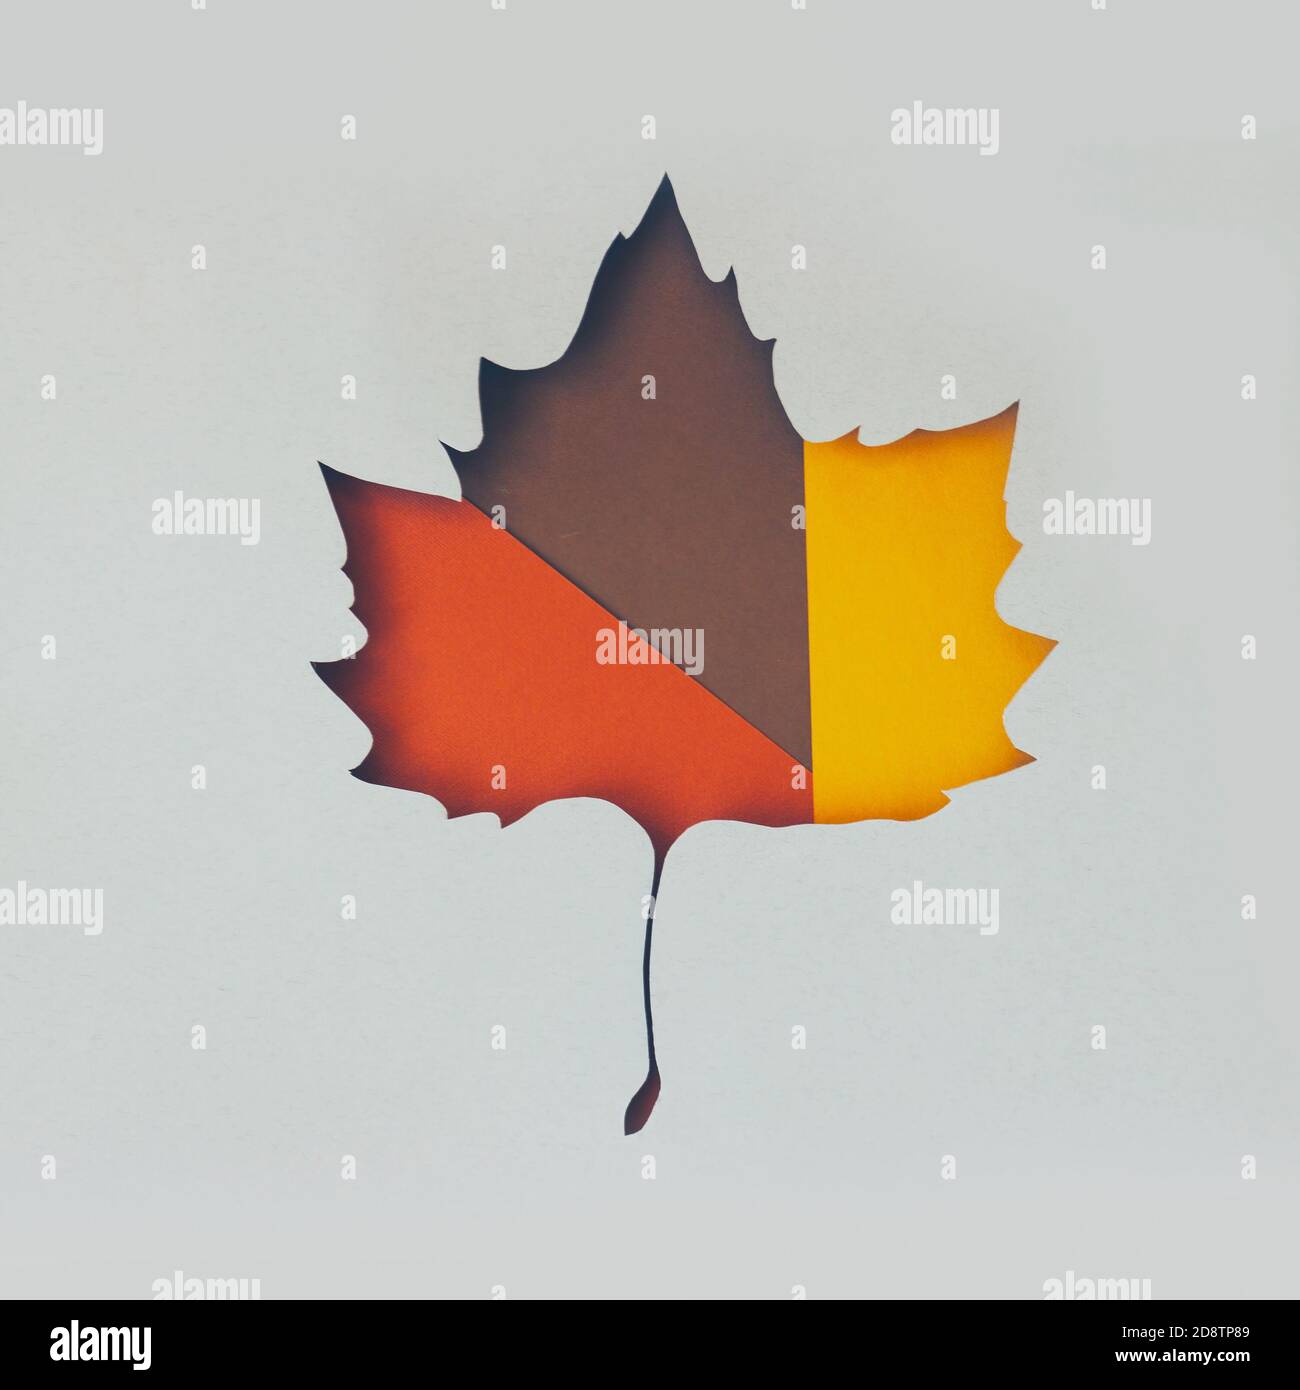 Creative autumn layout made of fallen leaves in shape of a leaf Stock Photo